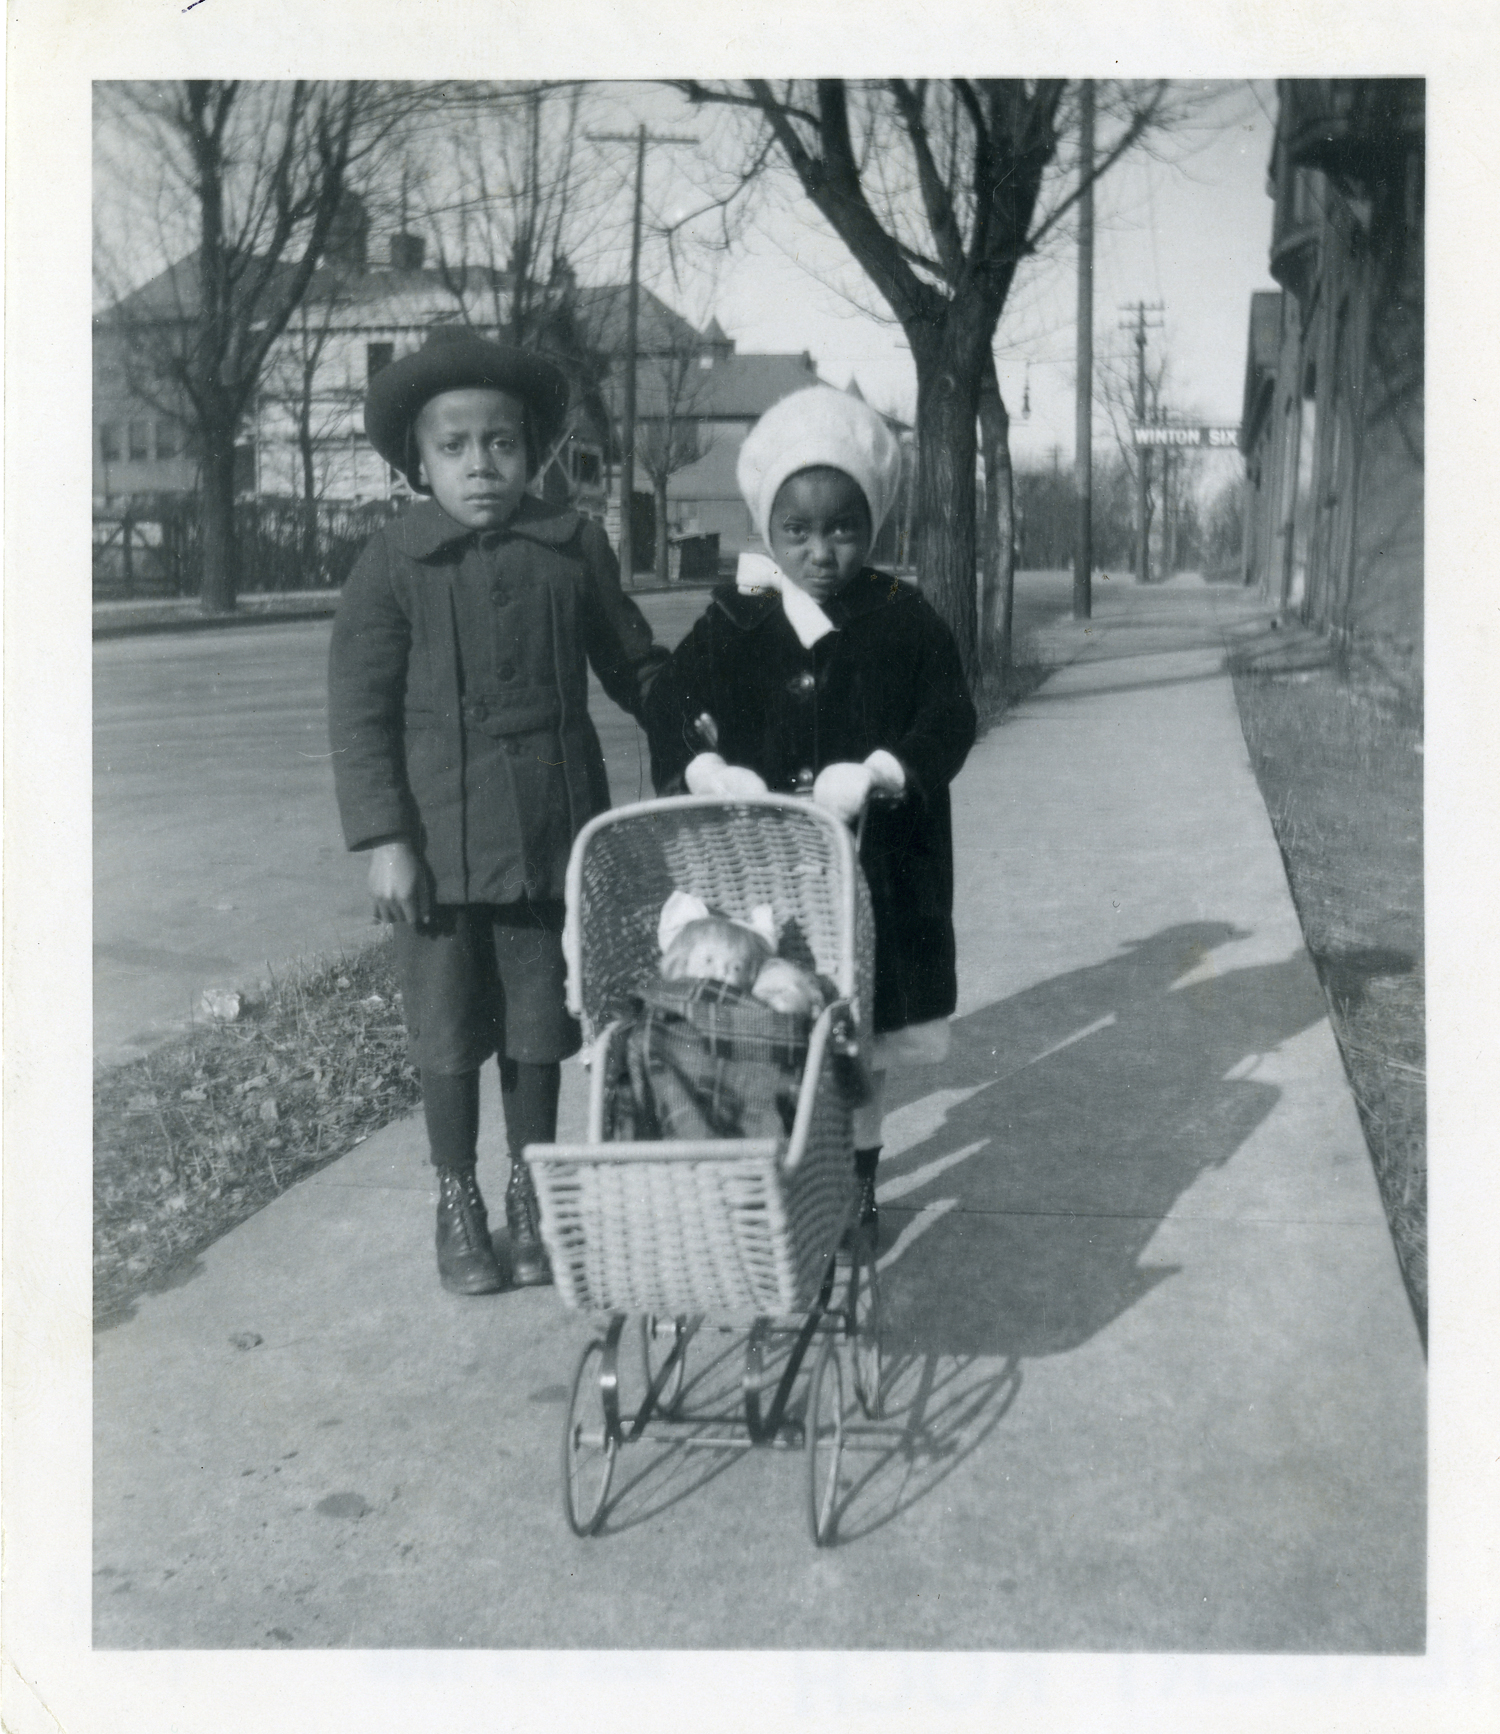 Felix J. Koch, Children with Toys, Walnut Hills, January 2, 1921. Gelatin silver print, 4 x 5 inches. Courtesy of Cincinnati Museum Center History Library and Archives